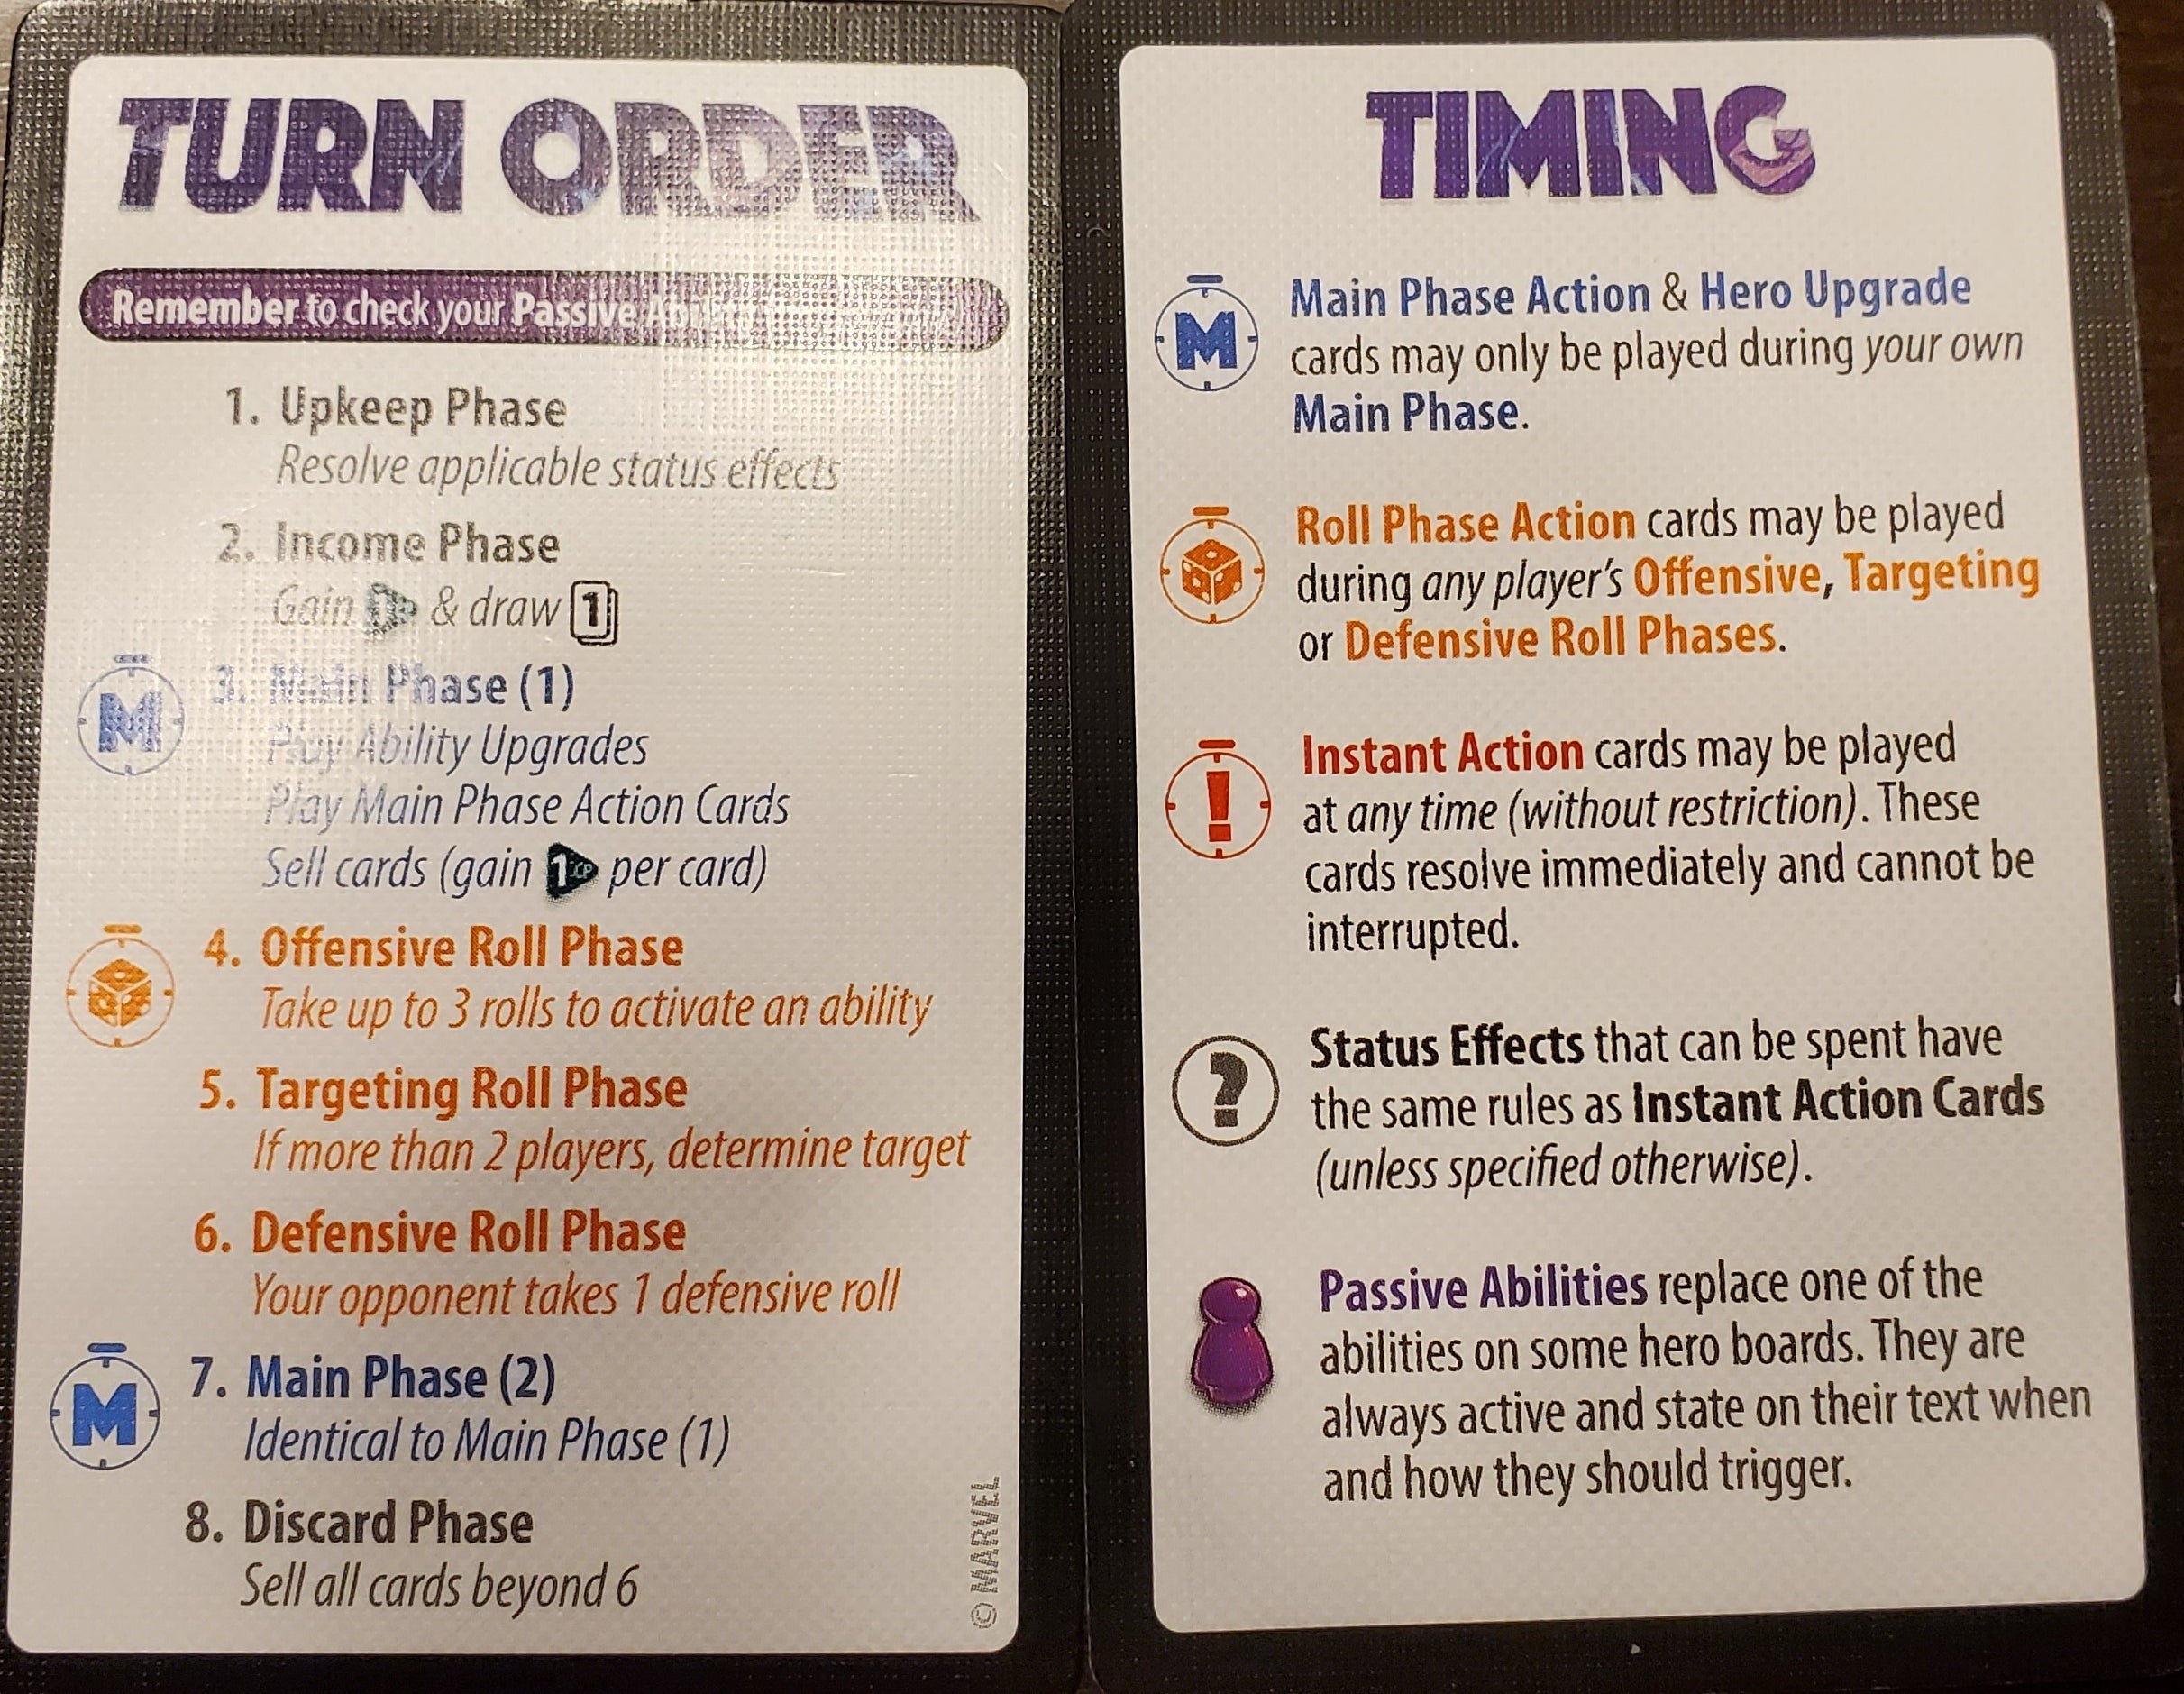 Marvel Dice Throne Turn Order and Timing